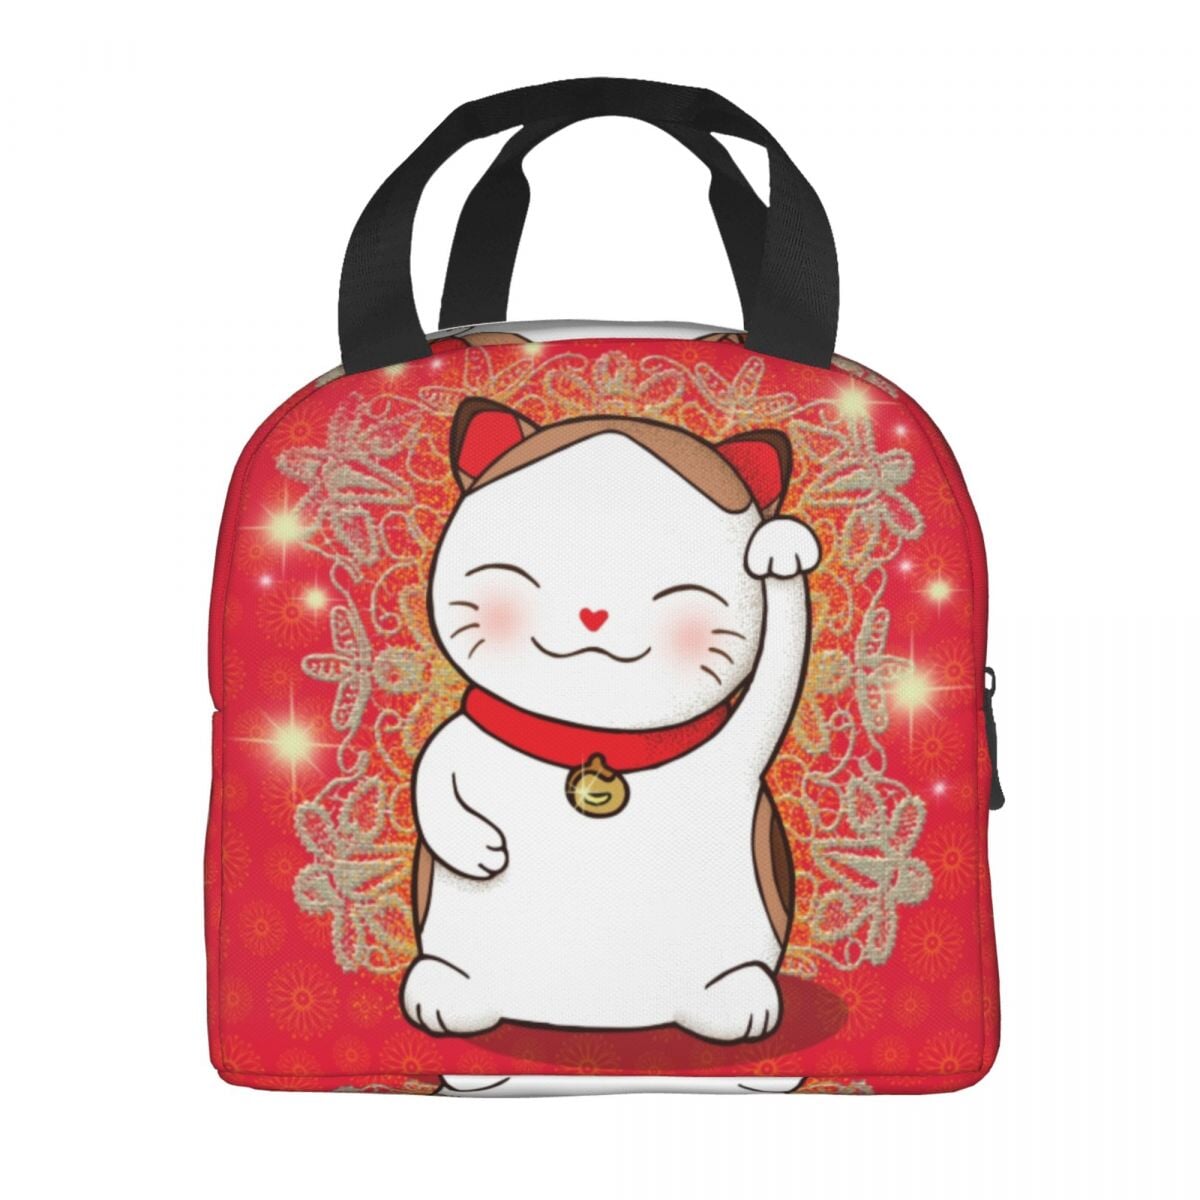 These Lifelike Cat Bags Are All The Rage In Japan